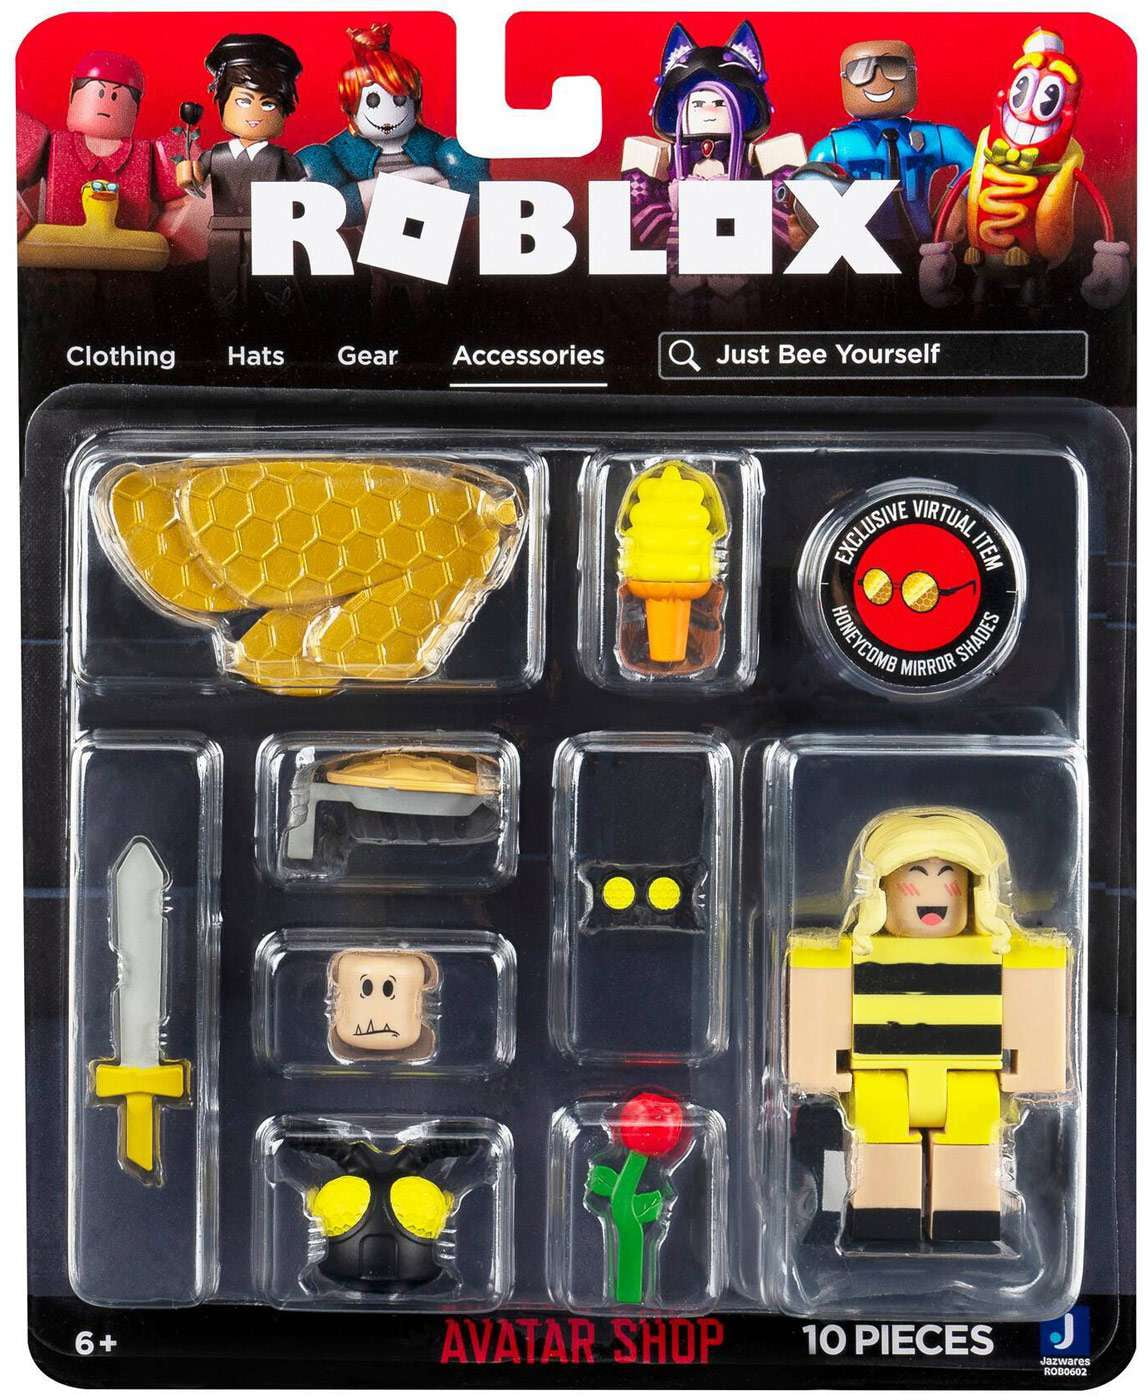 Roblox Avatar Shop  Bring the world of Roblox to life with the